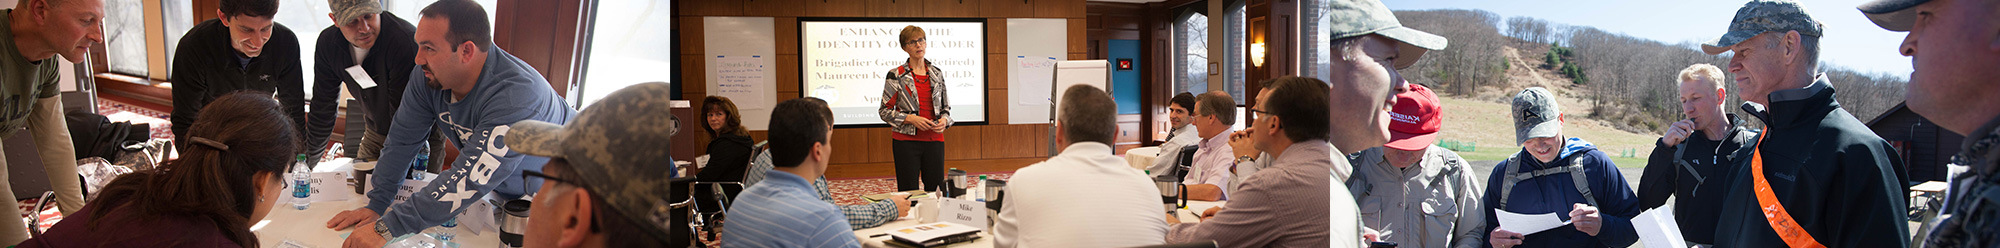 VALUES-DRIVEN LEADERSHIP JOURNEY: LESSONS FROM THE ARMY AND WEST POINT